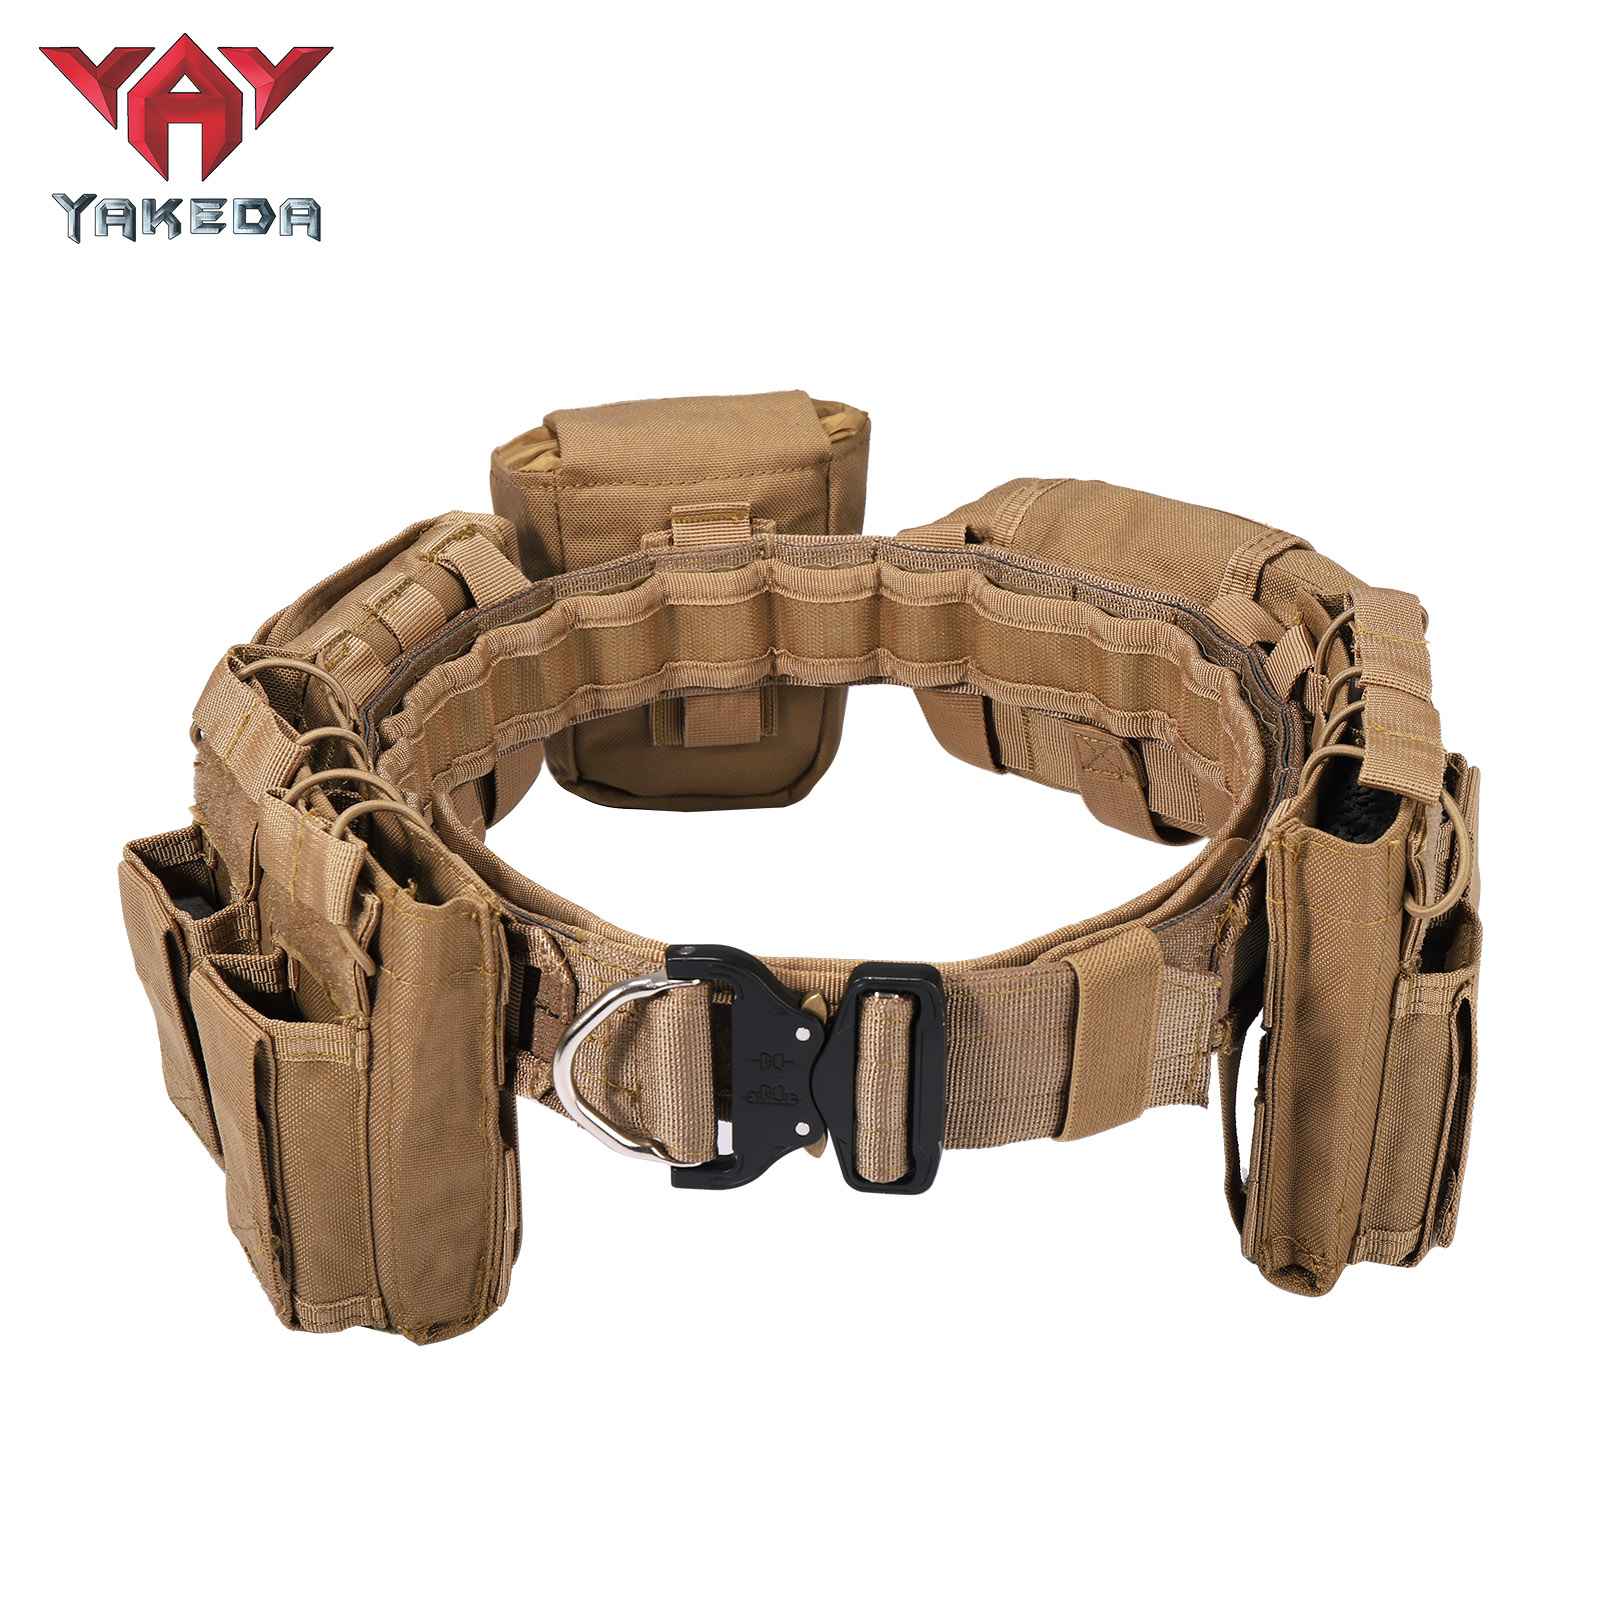 Yakeda MOLLE Quick Release Combat Battle Belt With Pouches Heavy Duty Inner & Outer Belt Tactical Belt Set